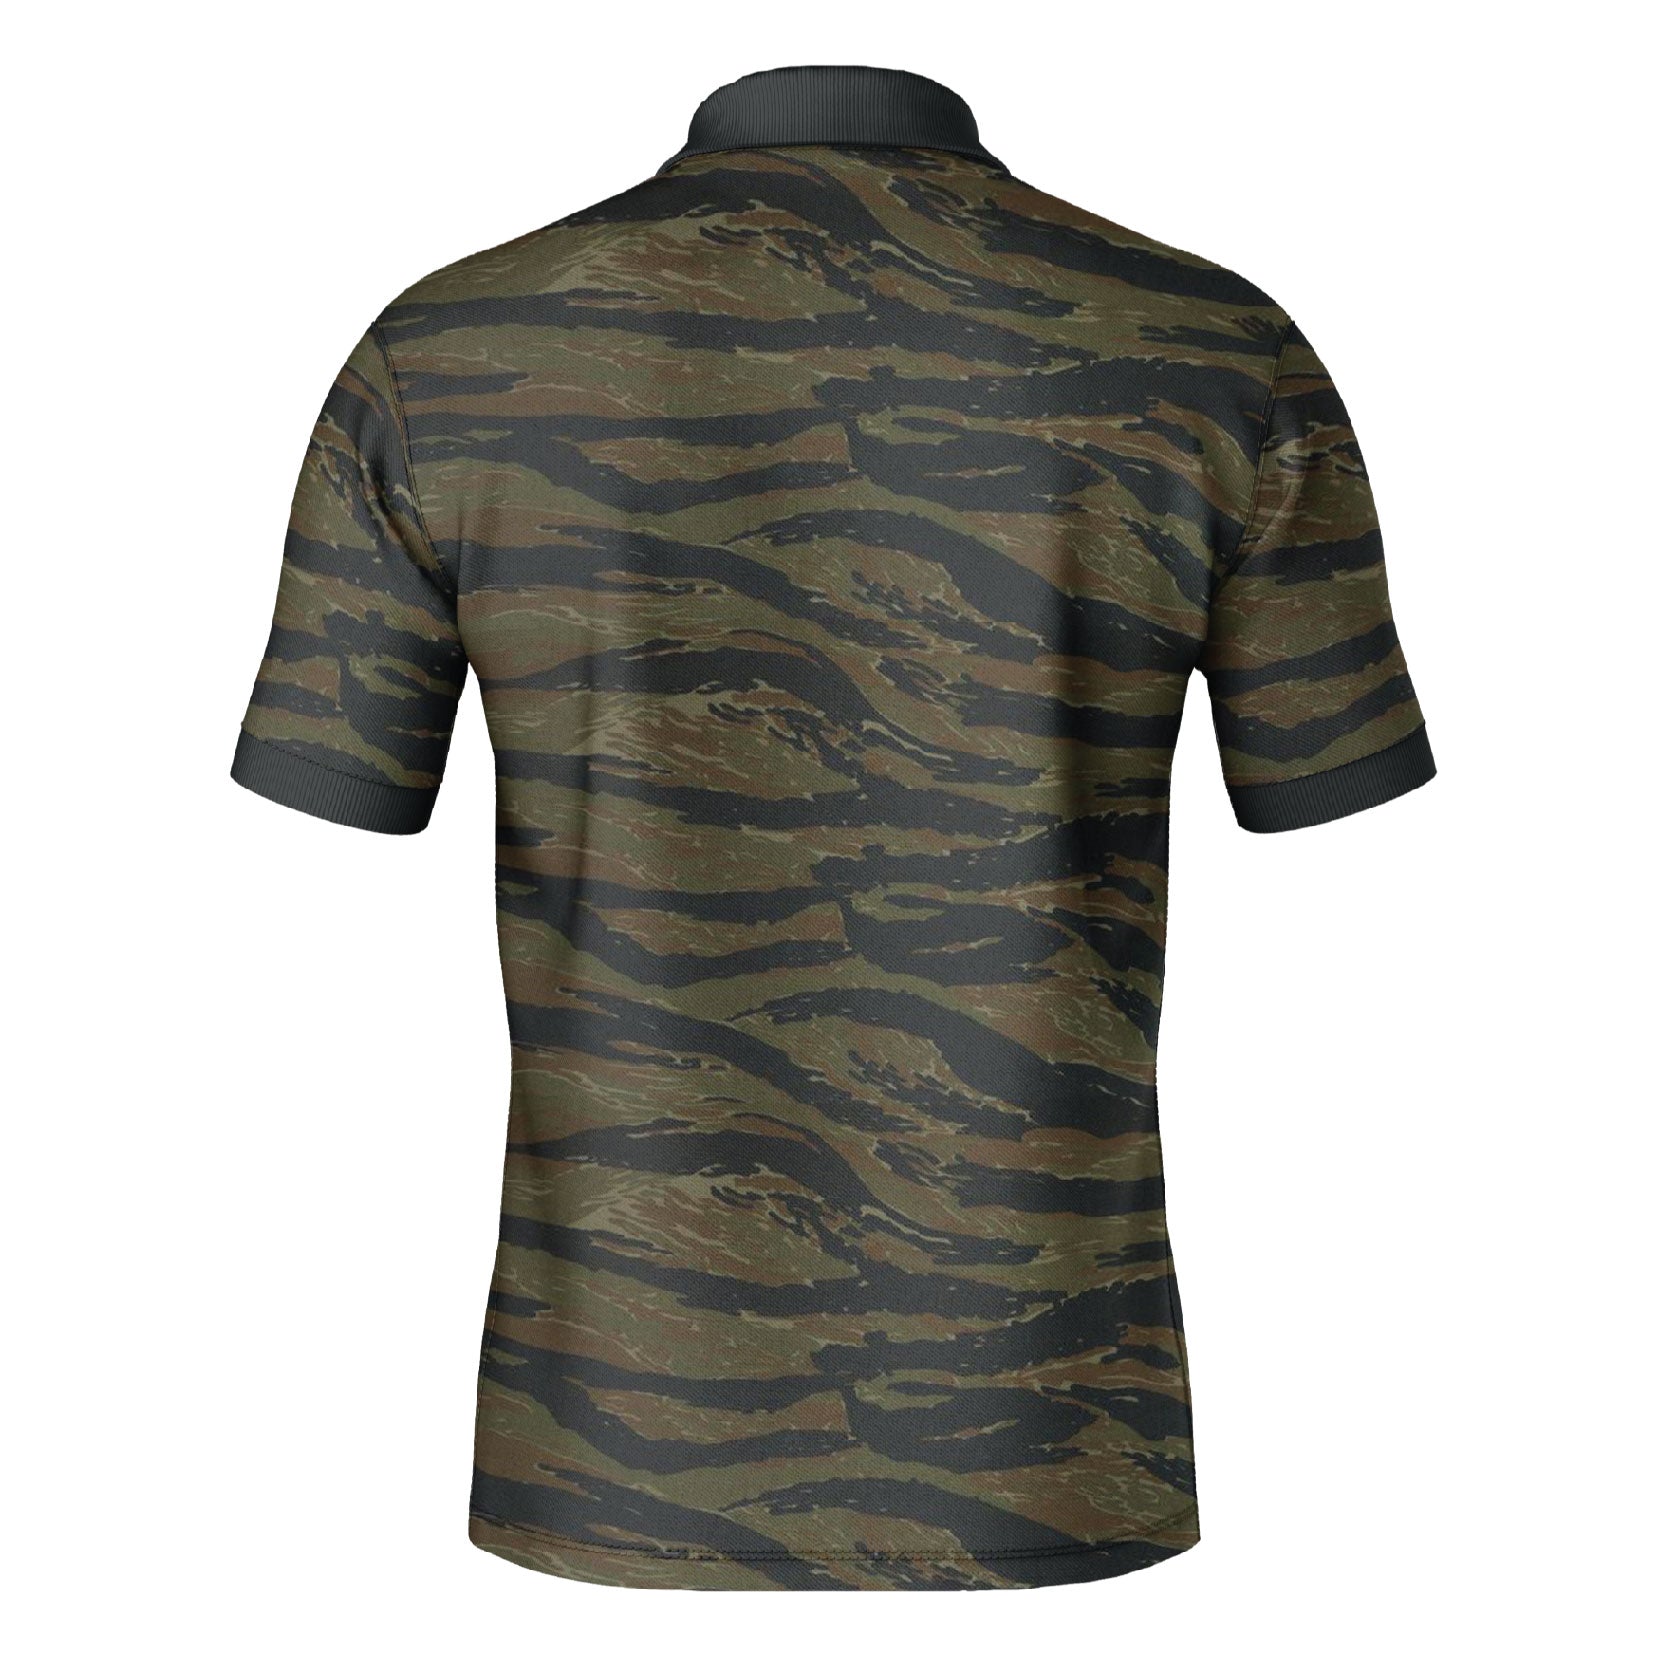 Valor PX - POLO Tiger Stripes ตำรวจพลร่ม Limited Edition